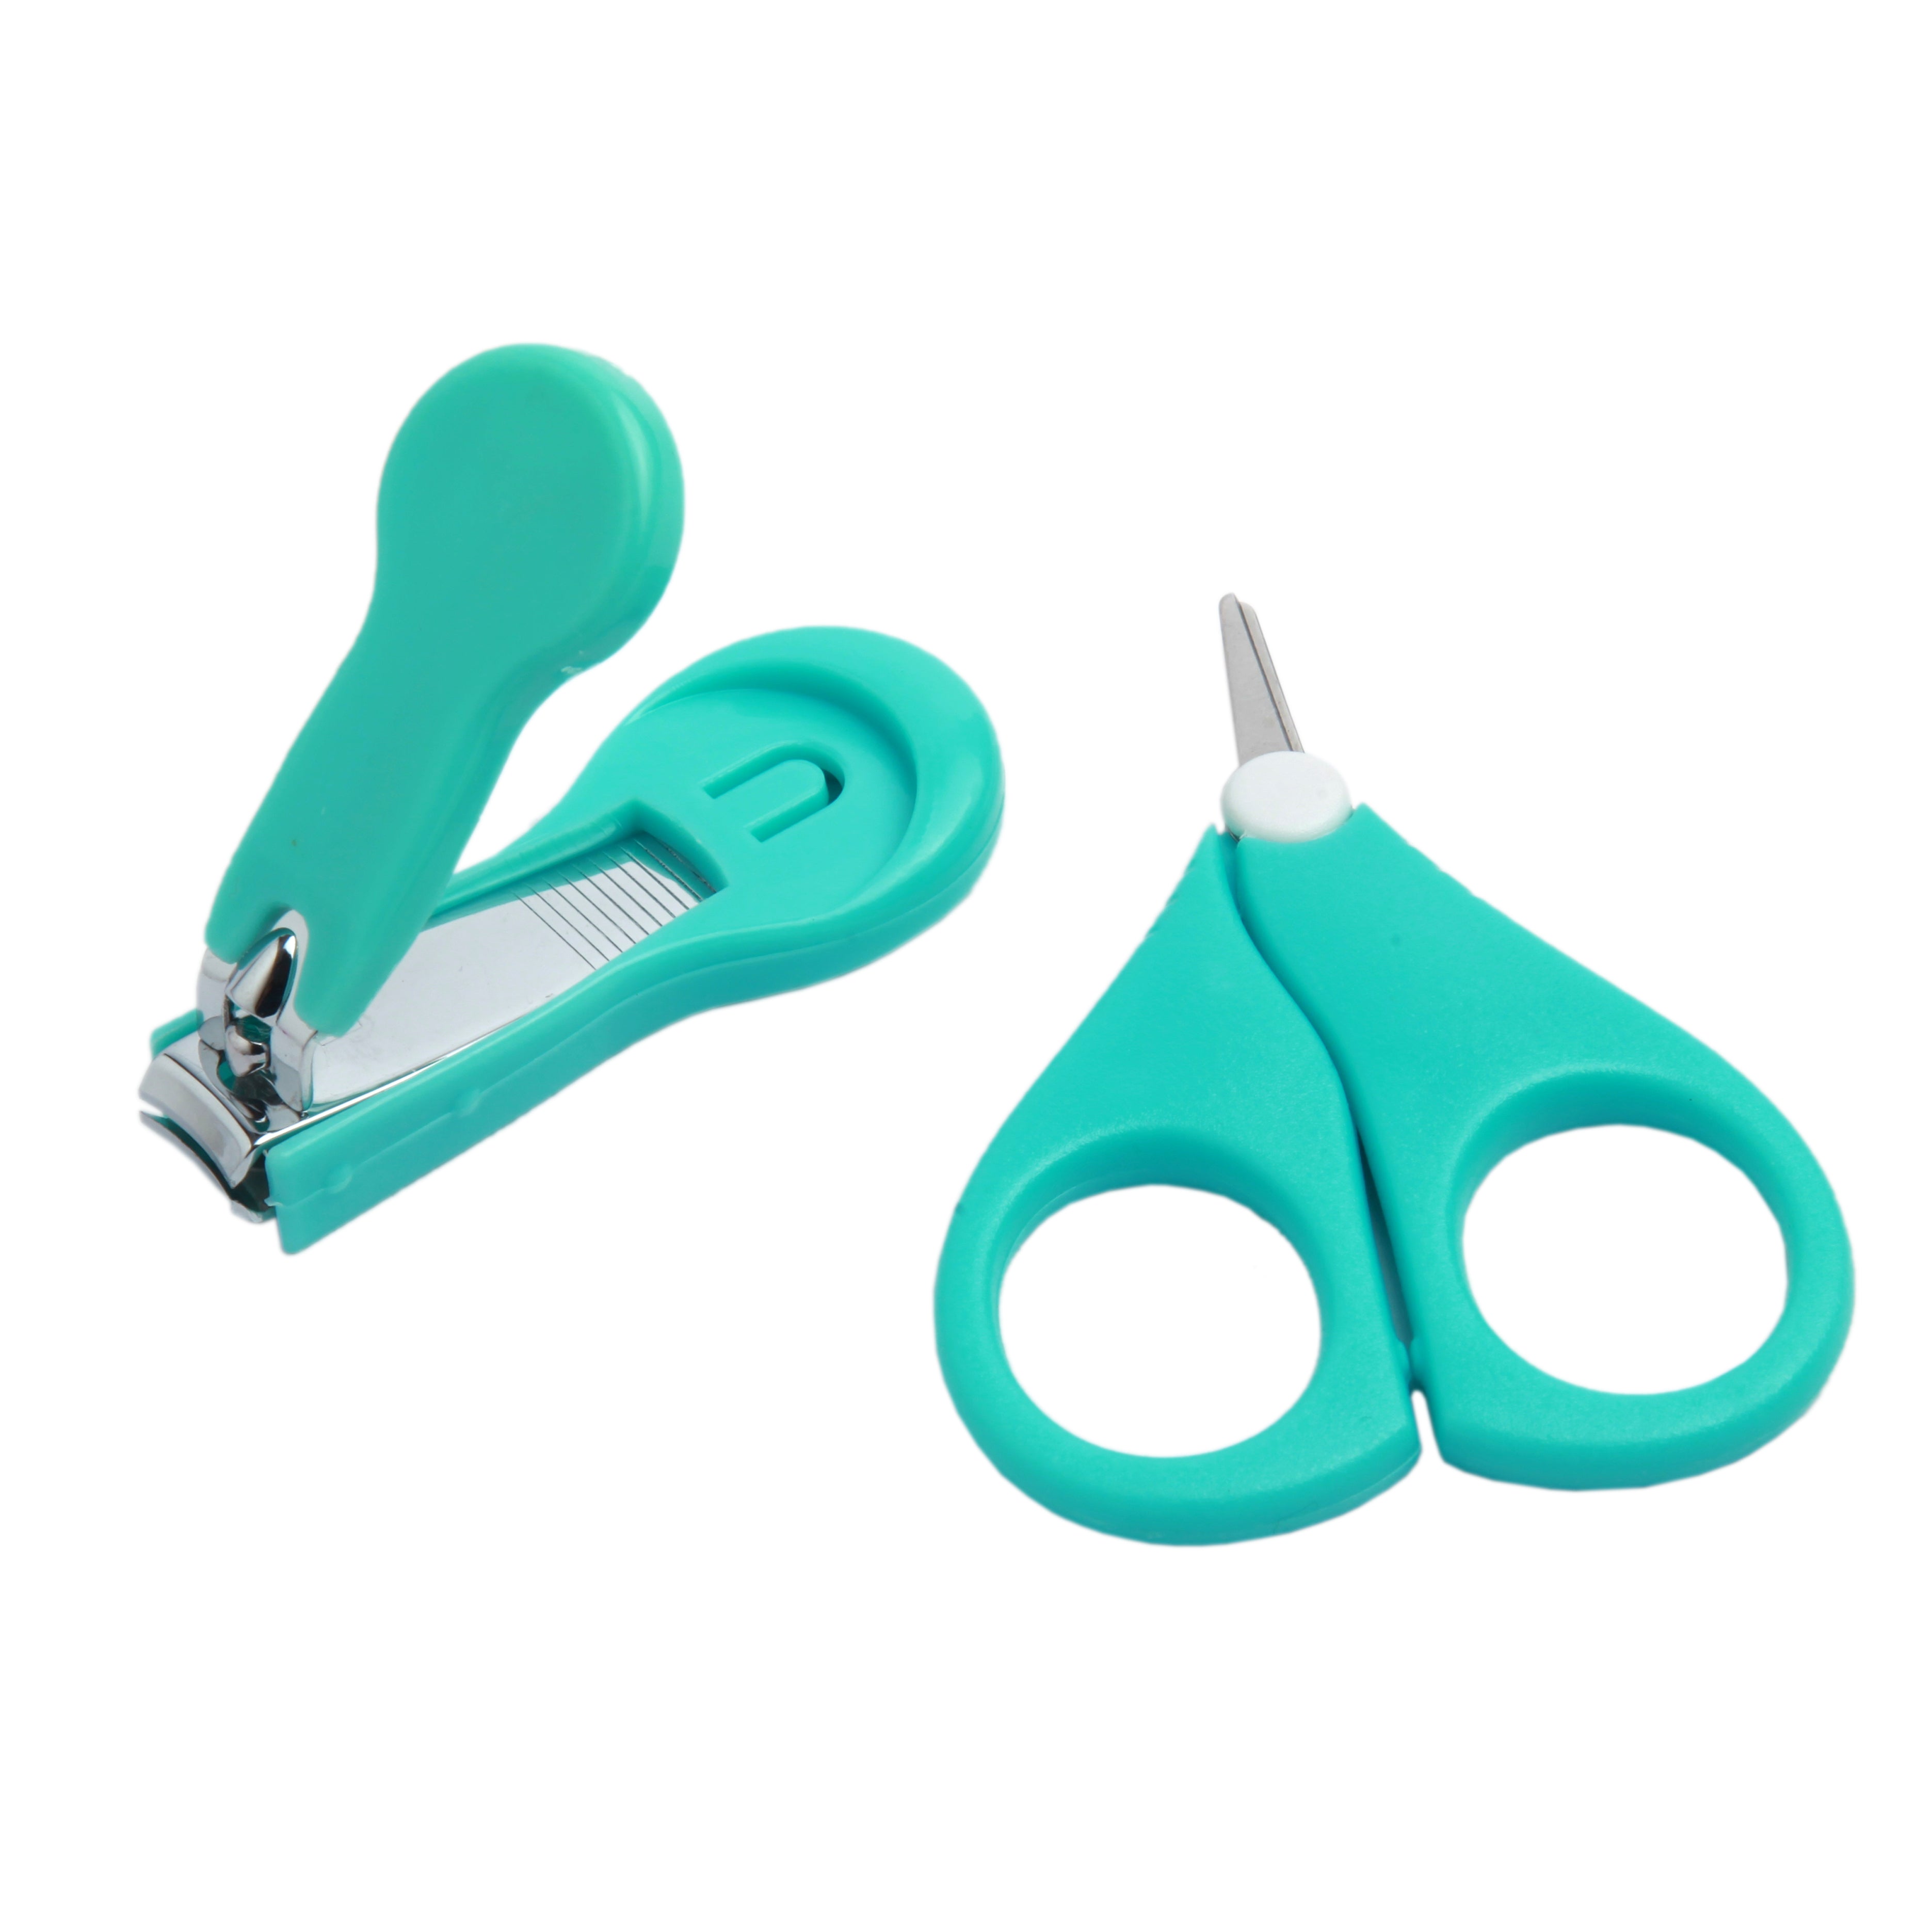 Grooming My Star Turquoise 4 Pcs Nail Clipper Set - Baby Moo